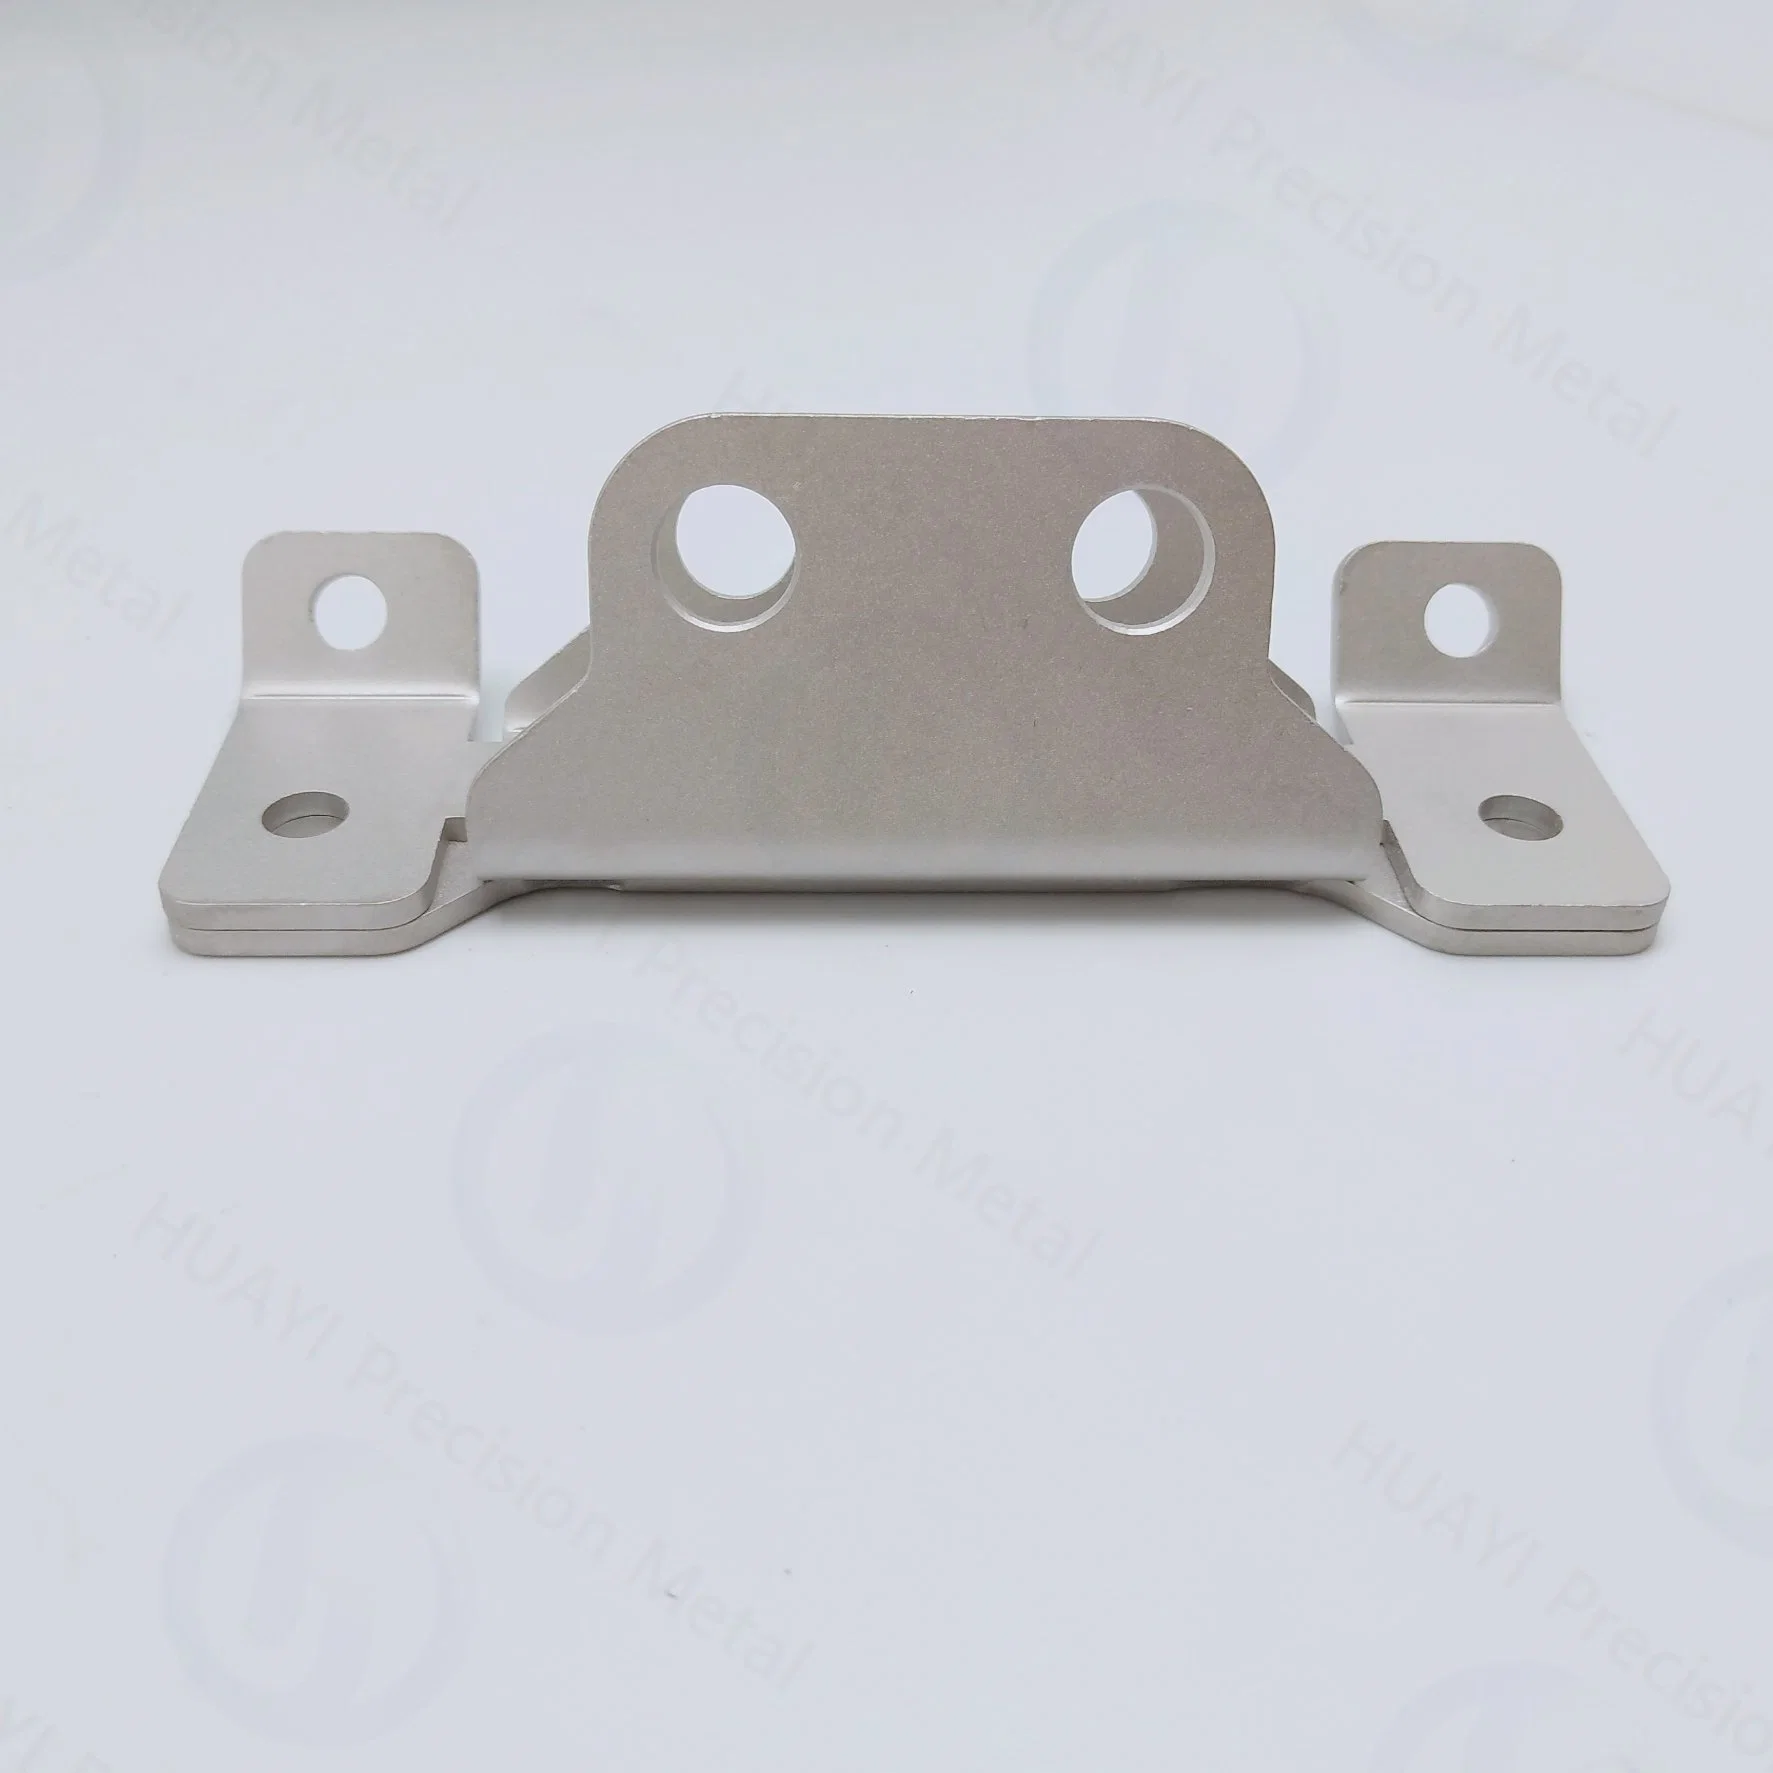 CNC Machining Service/Mold Steel CNC Turning Milling Parts Service in China Dongguan